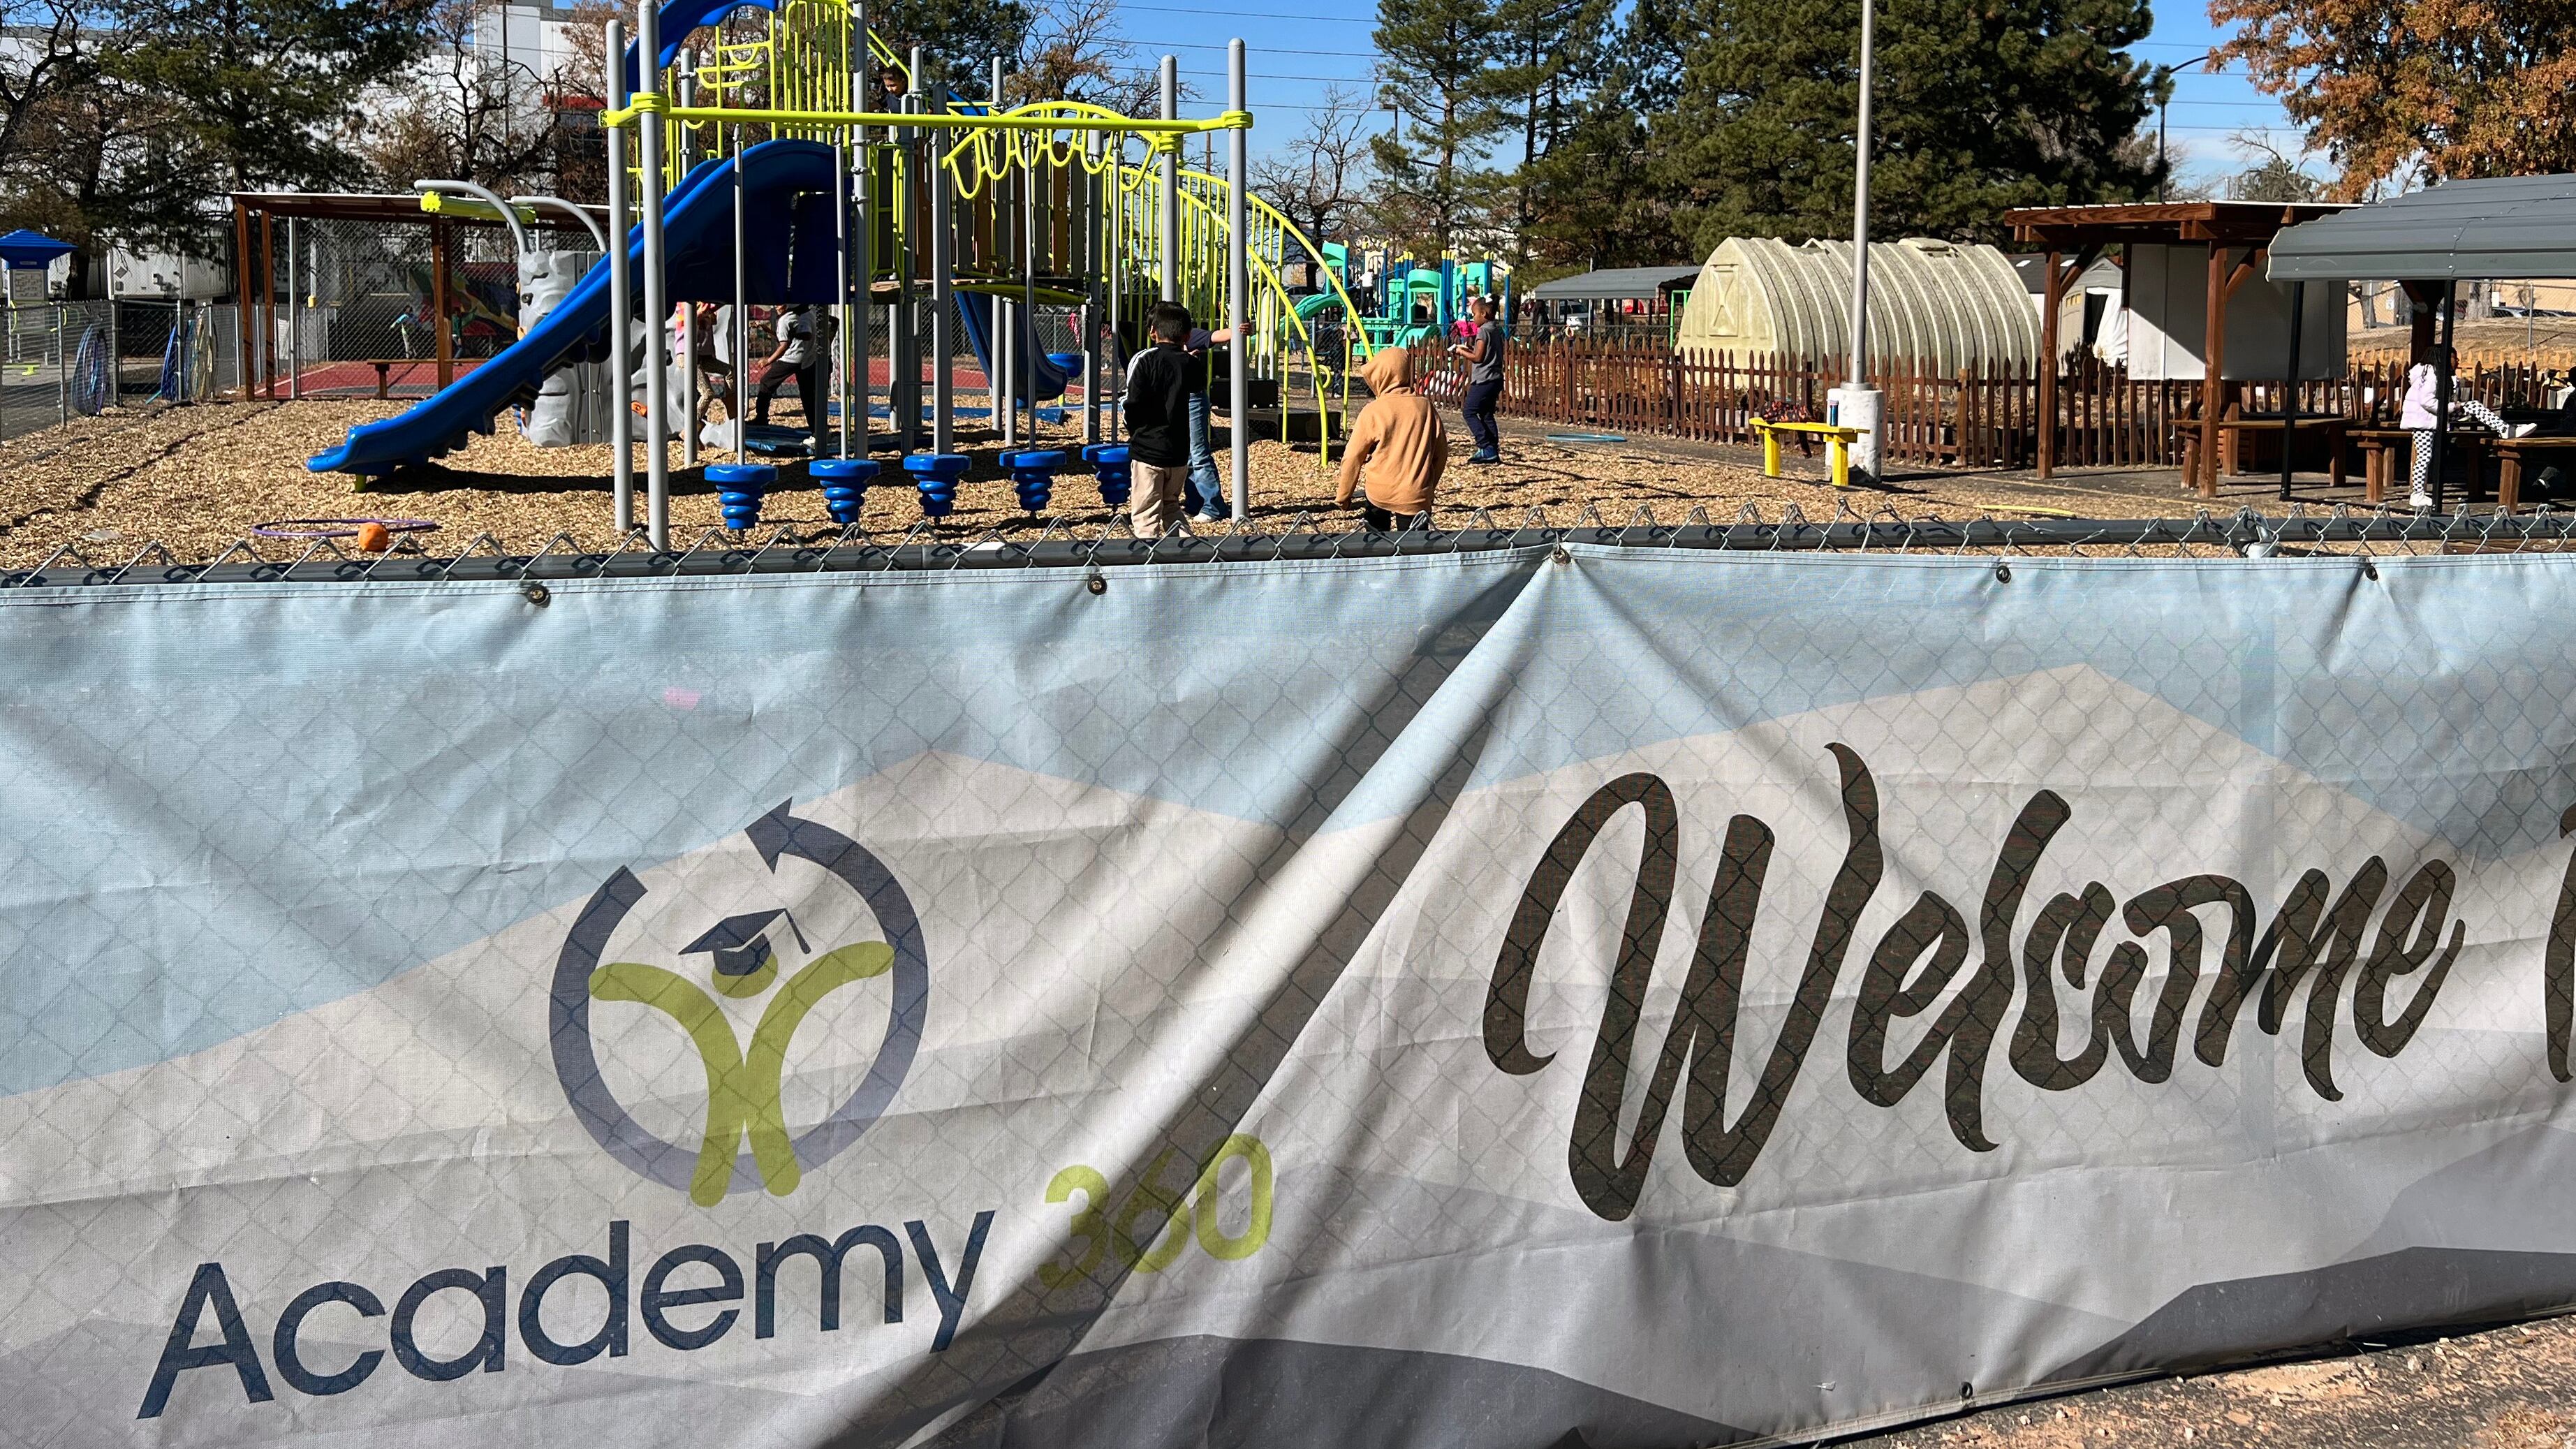 A banner with the words "Academy 360" and "Welcome" in the foreground with young students playing at a playground in the background.